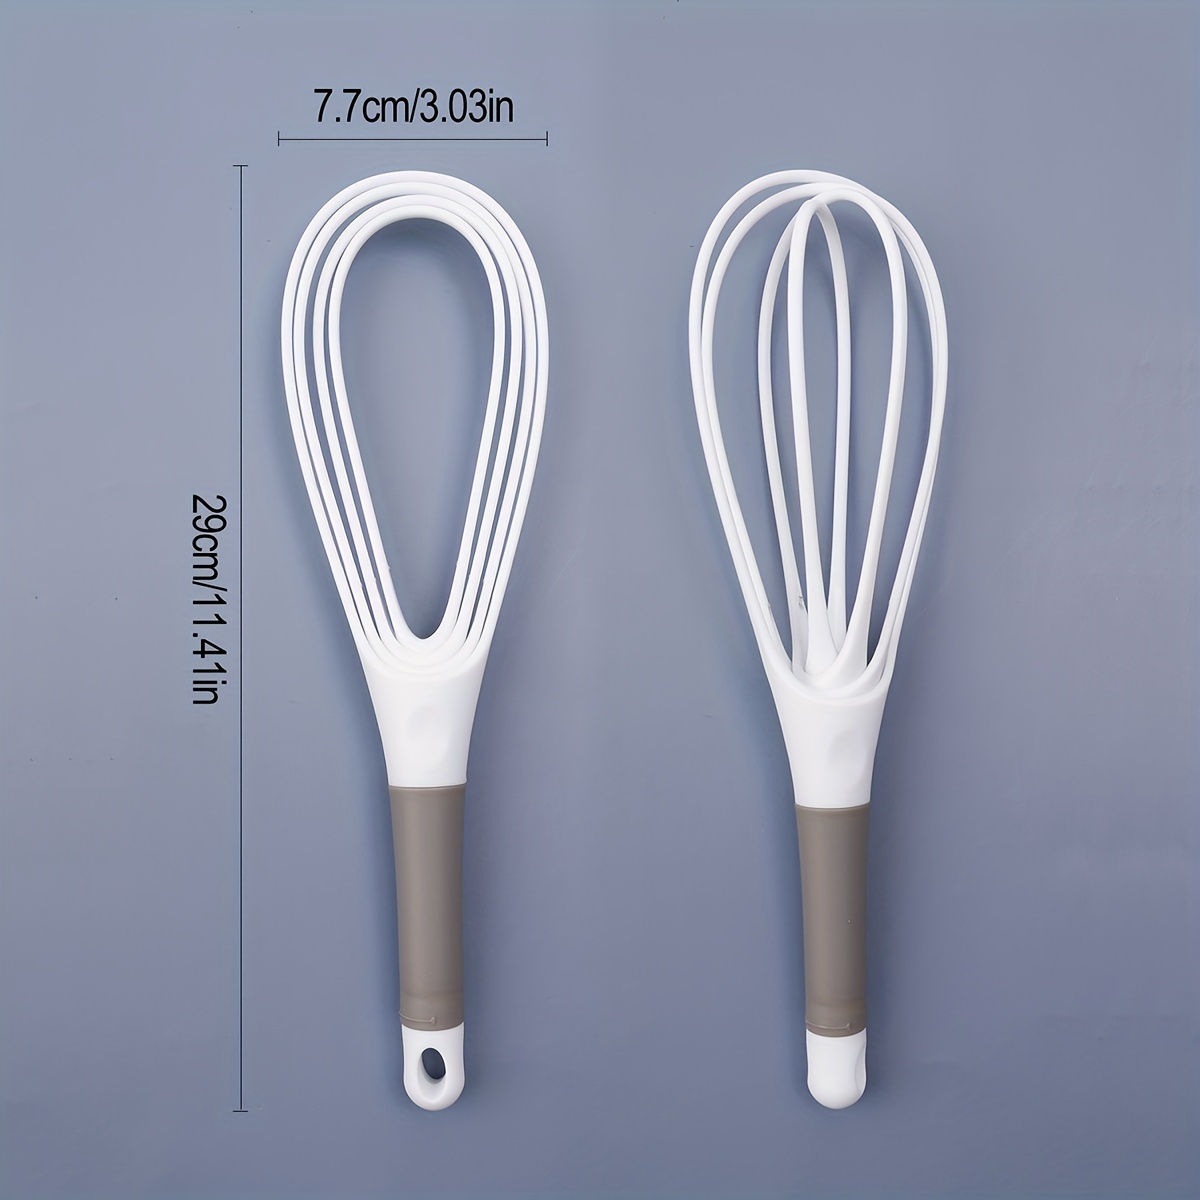 Twist Whisk Goes From Flat To Balloon At The Turn Of A Knob